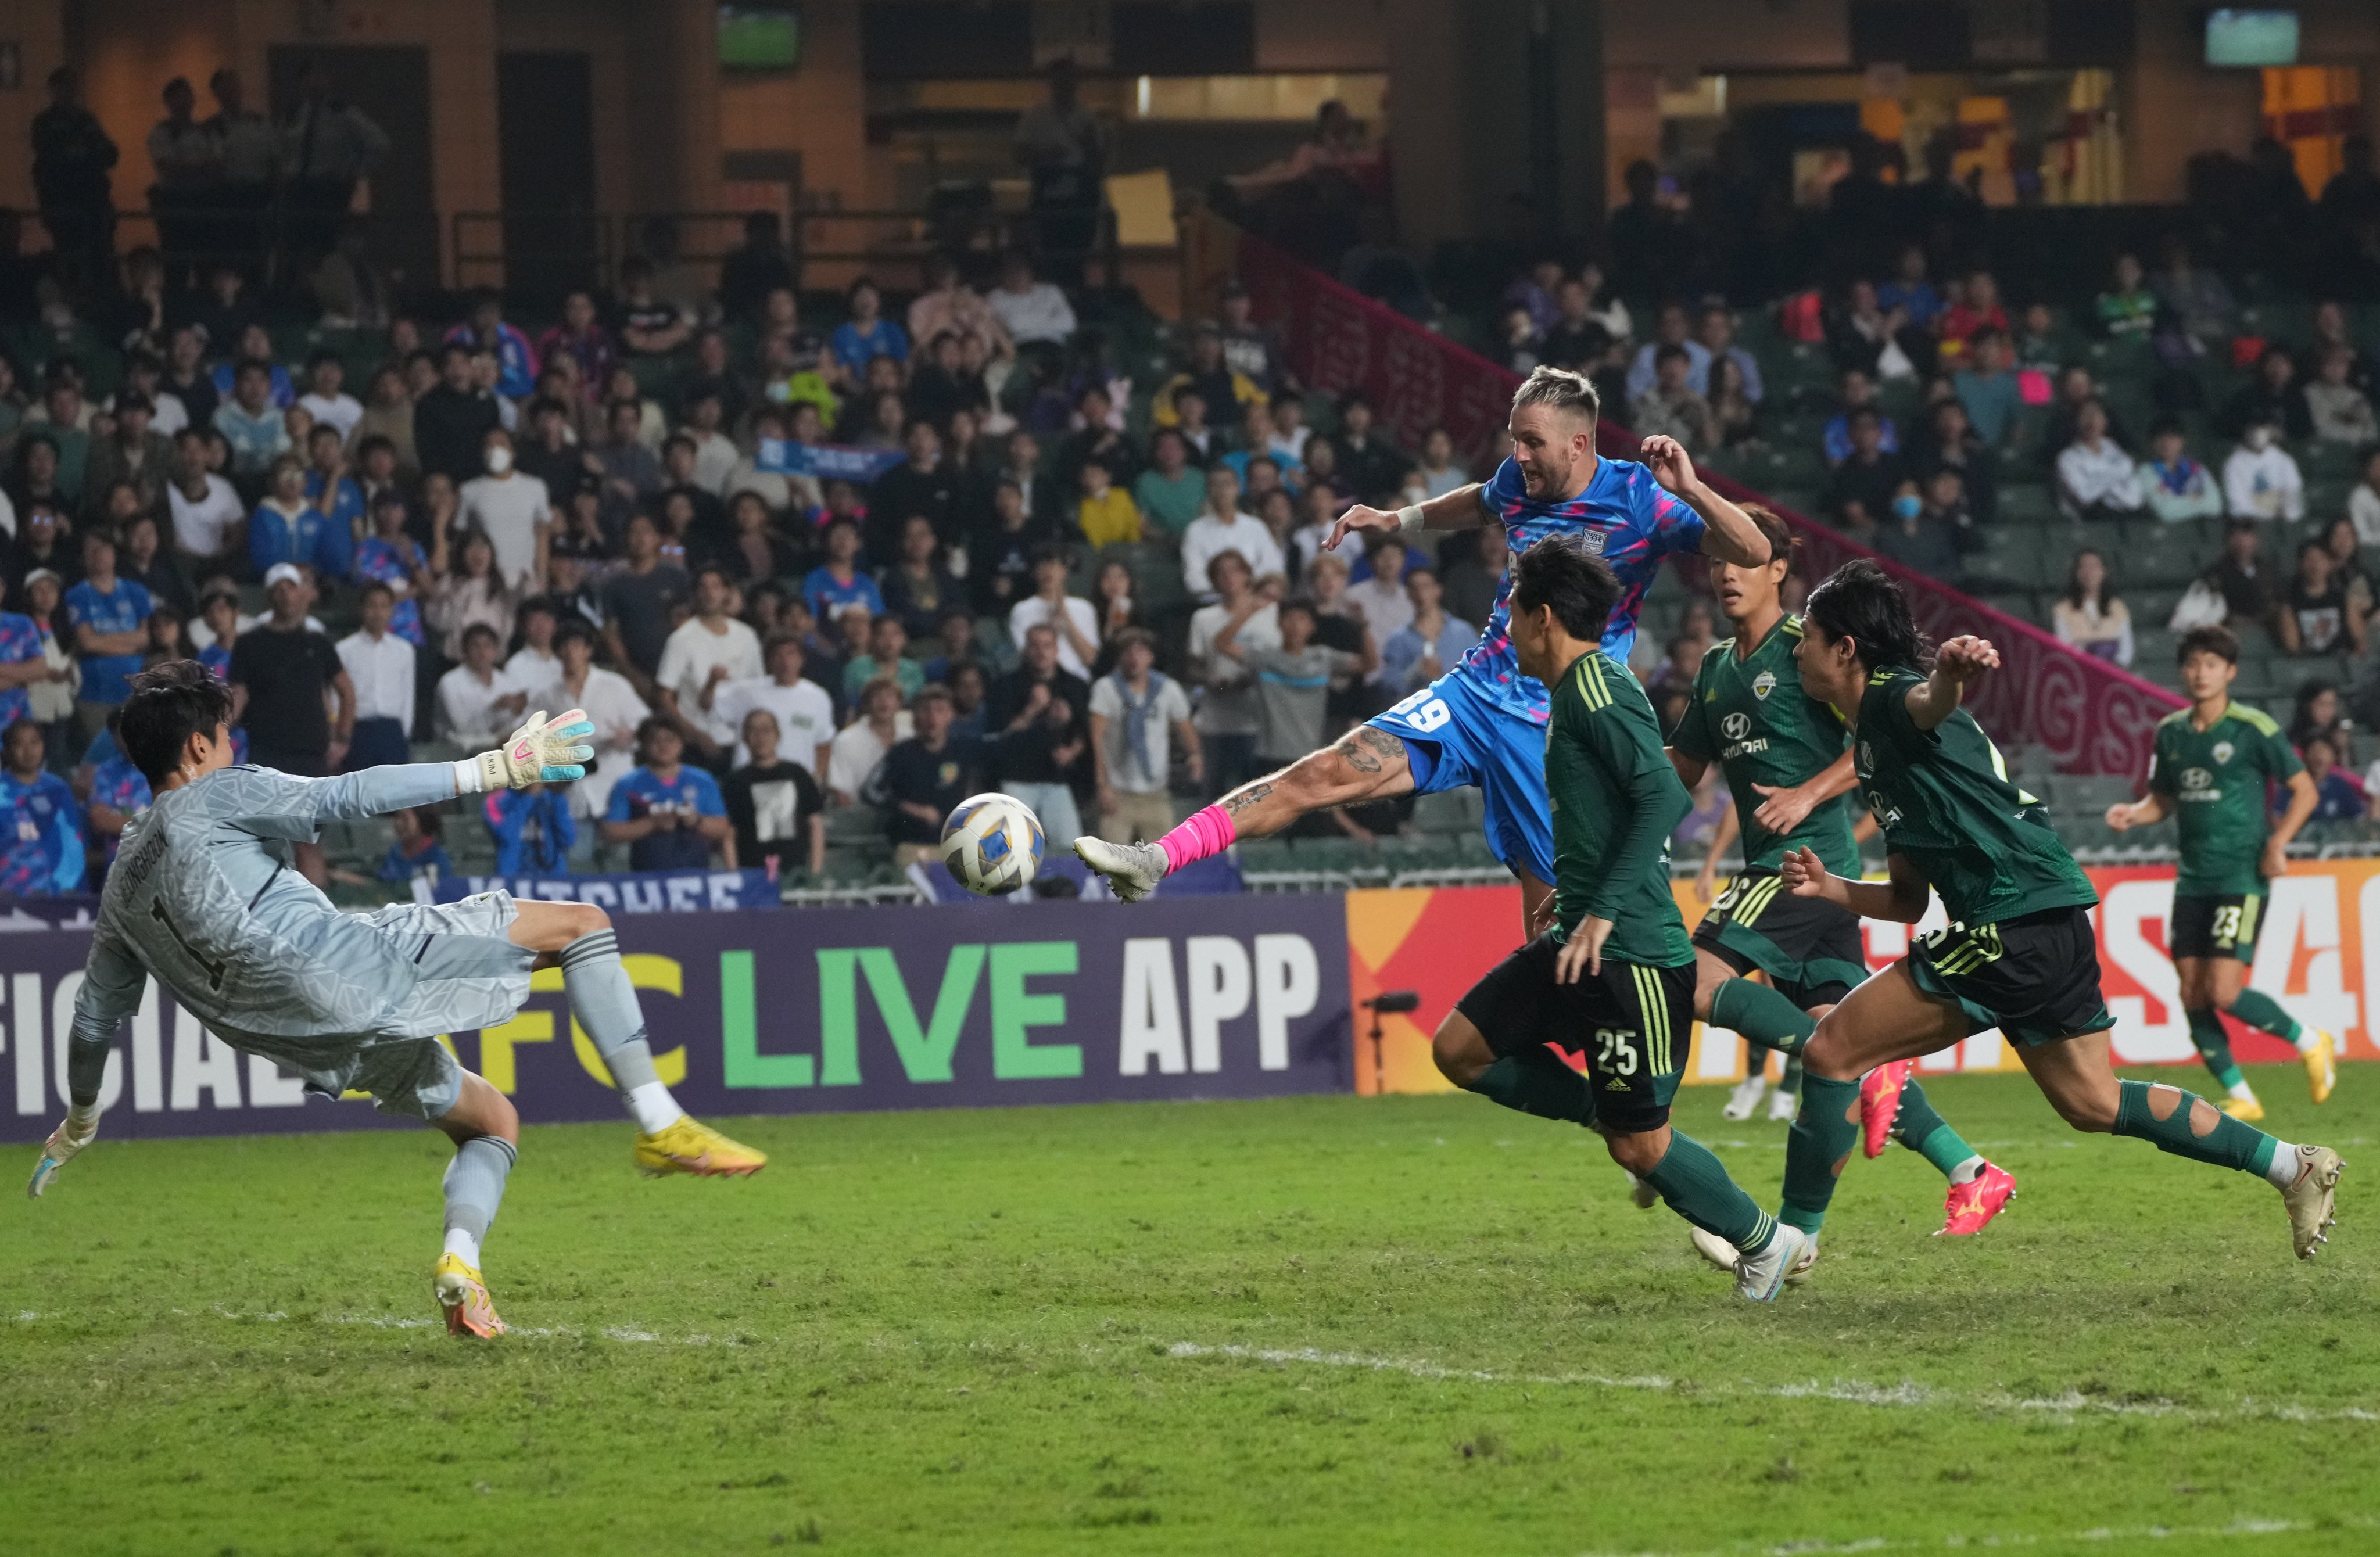 Kitchee’s Jakob Jantscher scores his side’s only goal during their AFC Champions League match against Jeonbuk Hyundai Motors at Hong Kong Stadium. Photo: Sam Tsang